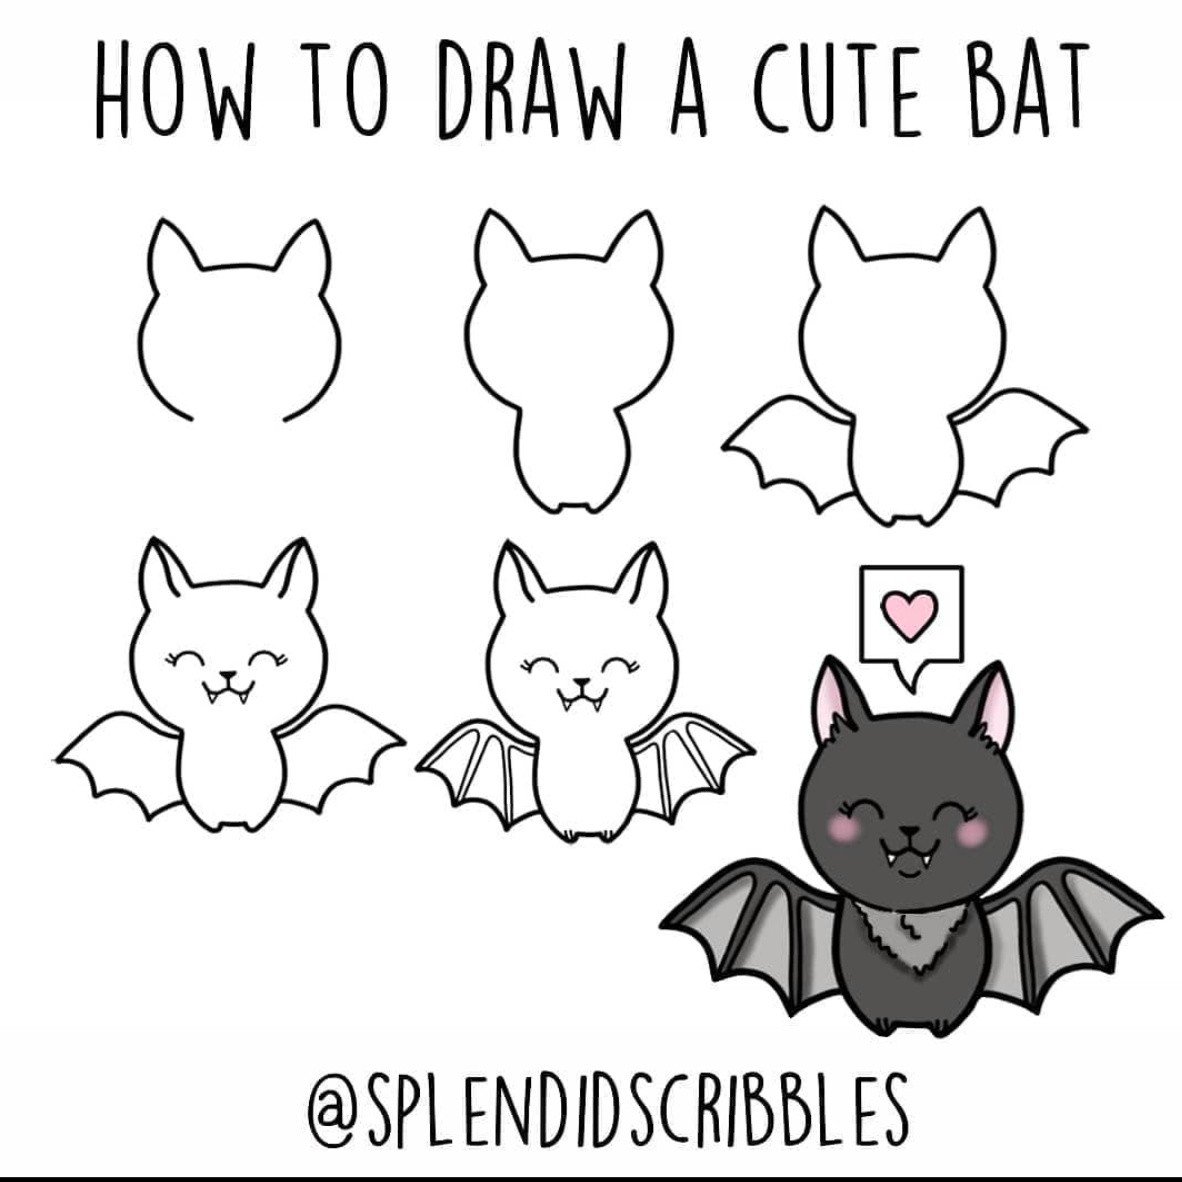 How to draw halloween stuff step by step The Smart Wander